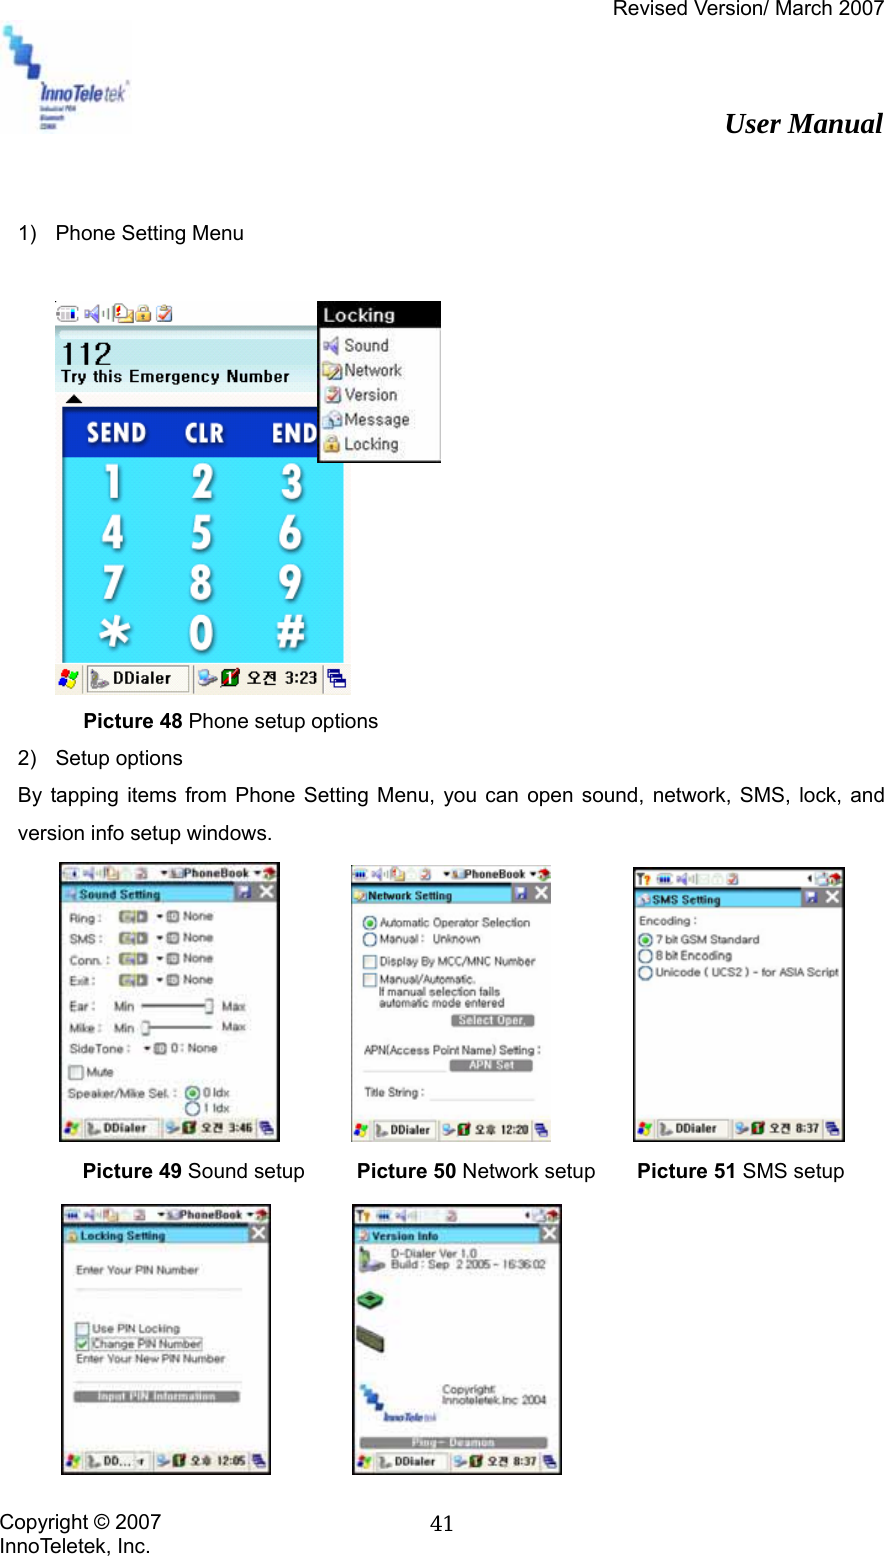 Revised Version/ March 2007                                                          User Manual Copyright © 2007 InnoTeletek, Inc.  41  1)  Phone Setting Menu             Picture 48 Phone setup options 2) Setup options By tapping items from Phone Setting Menu, you can open sound, network, SMS, lock, and version info setup windows.                     Picture 49 Sound setup     Picture 50 Network setup    Picture 51 SMS setup             